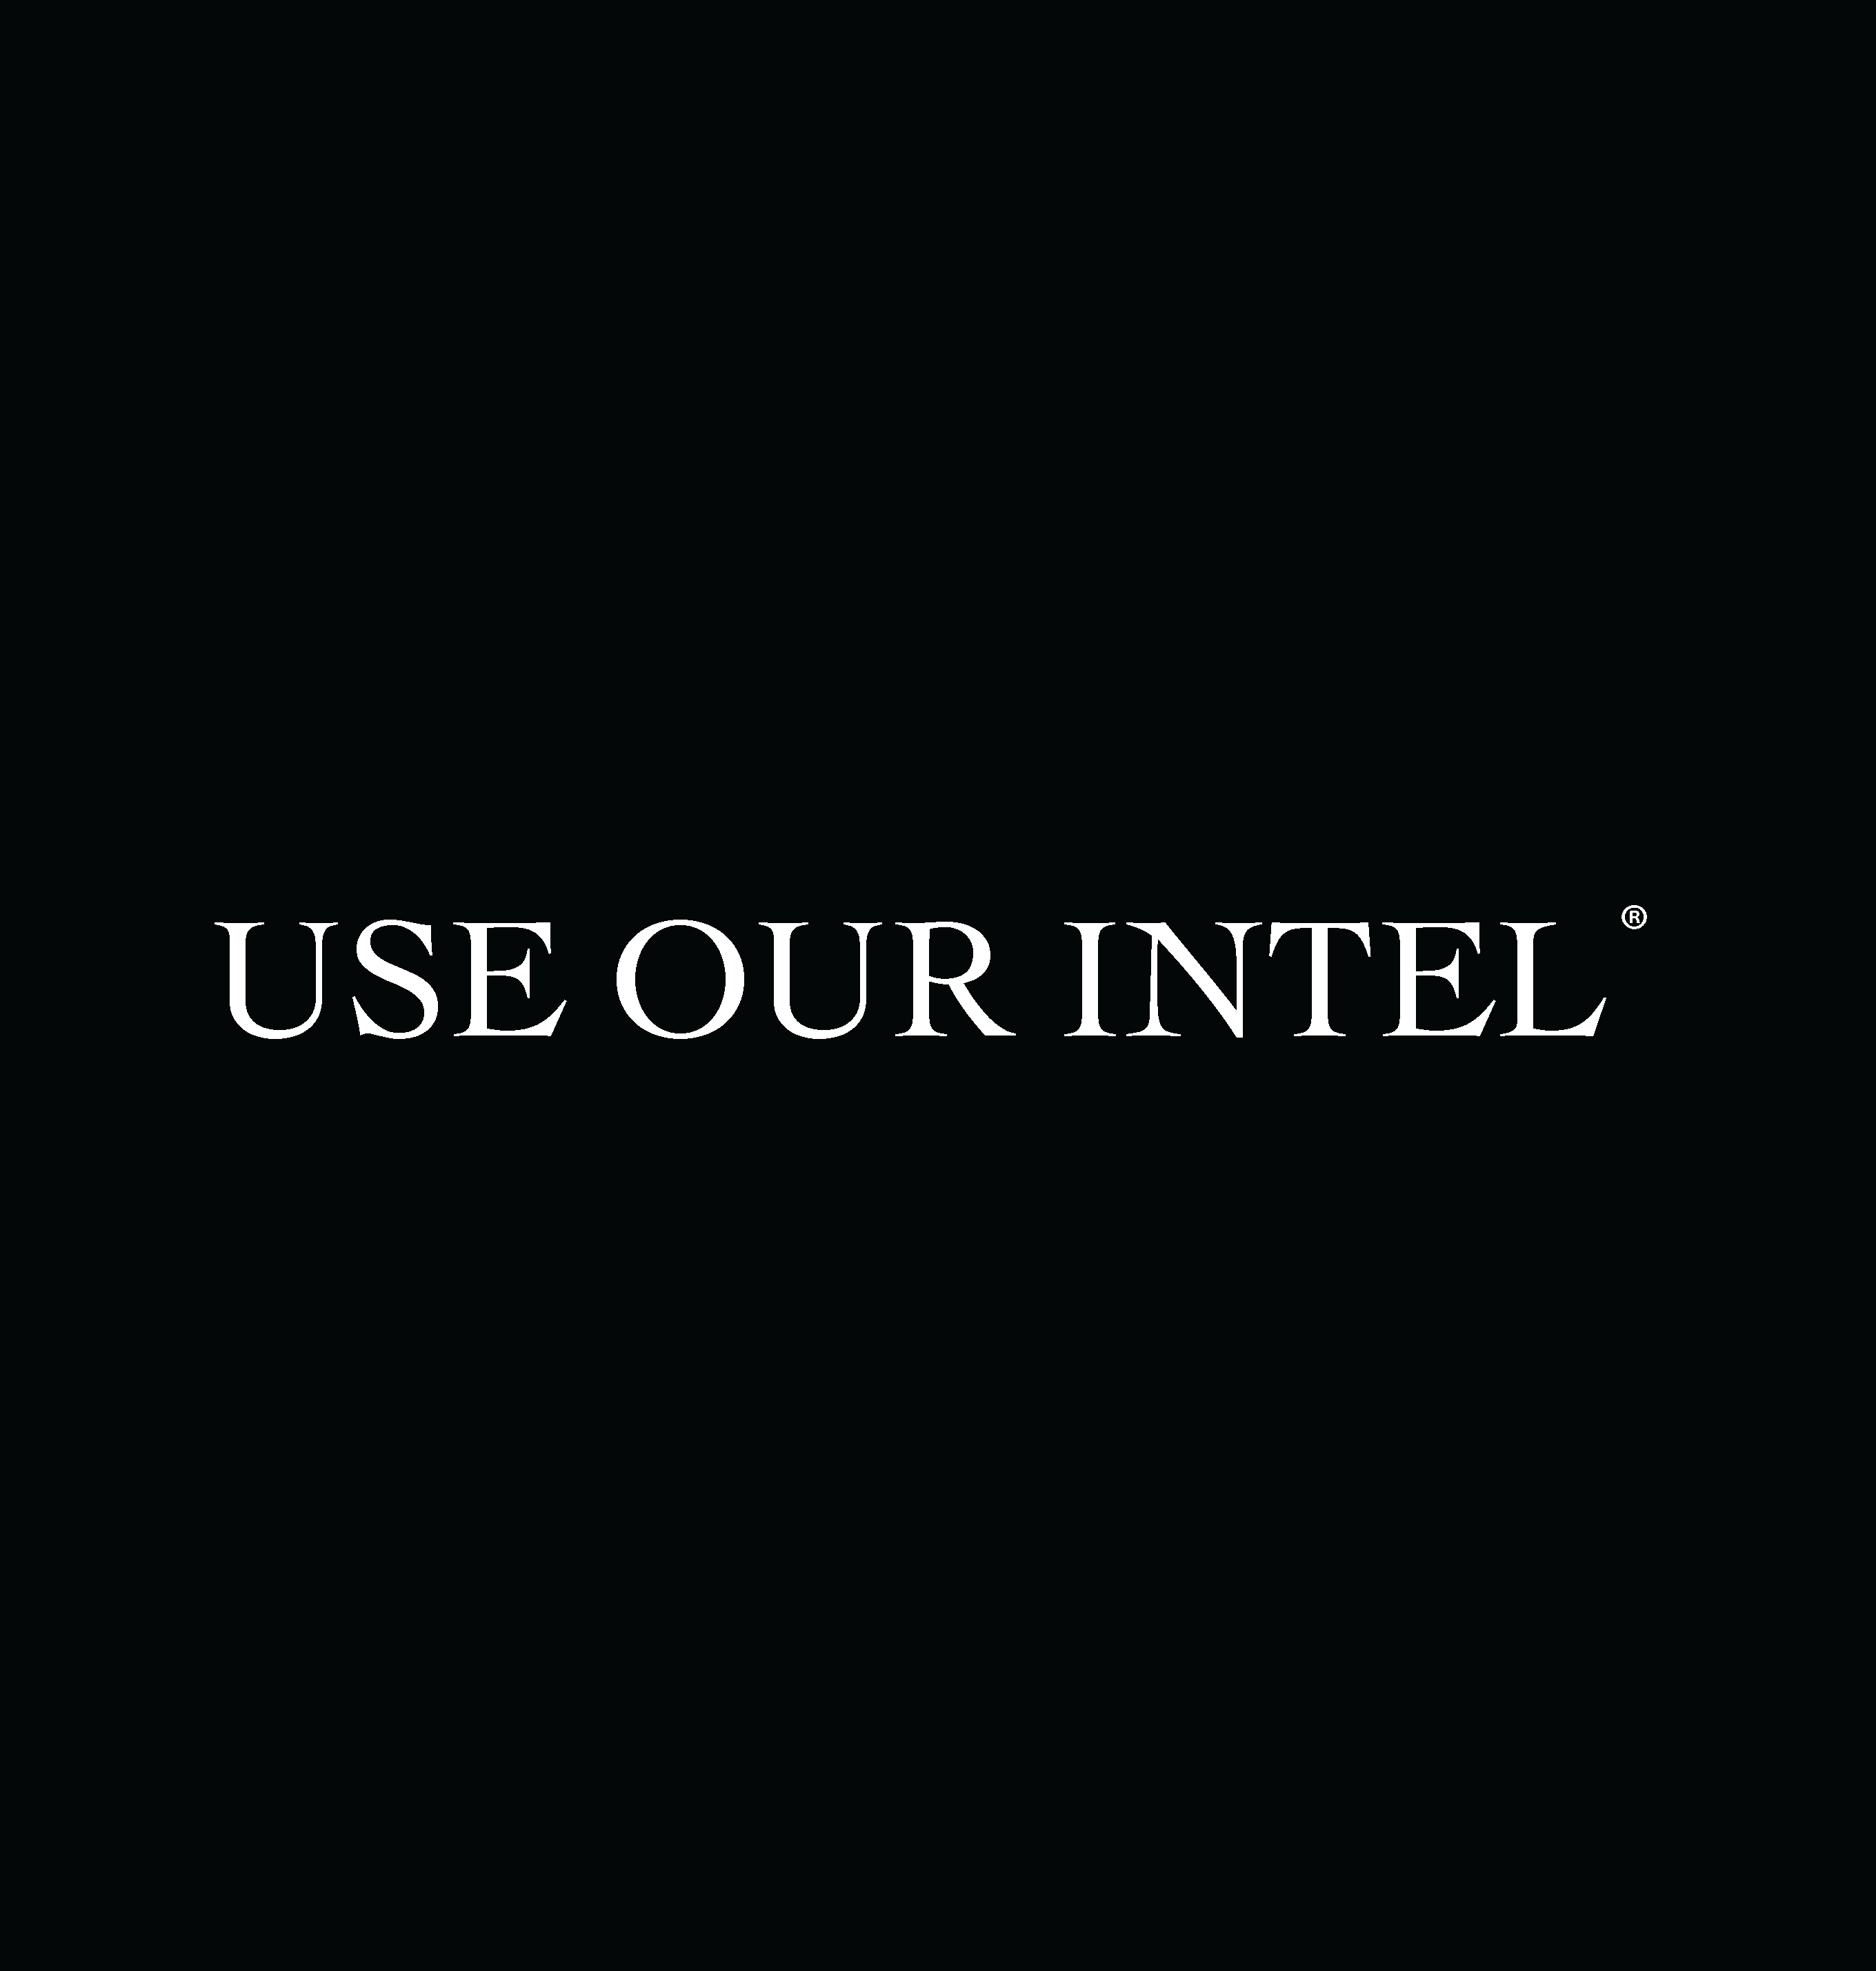 Use Our Intel logo